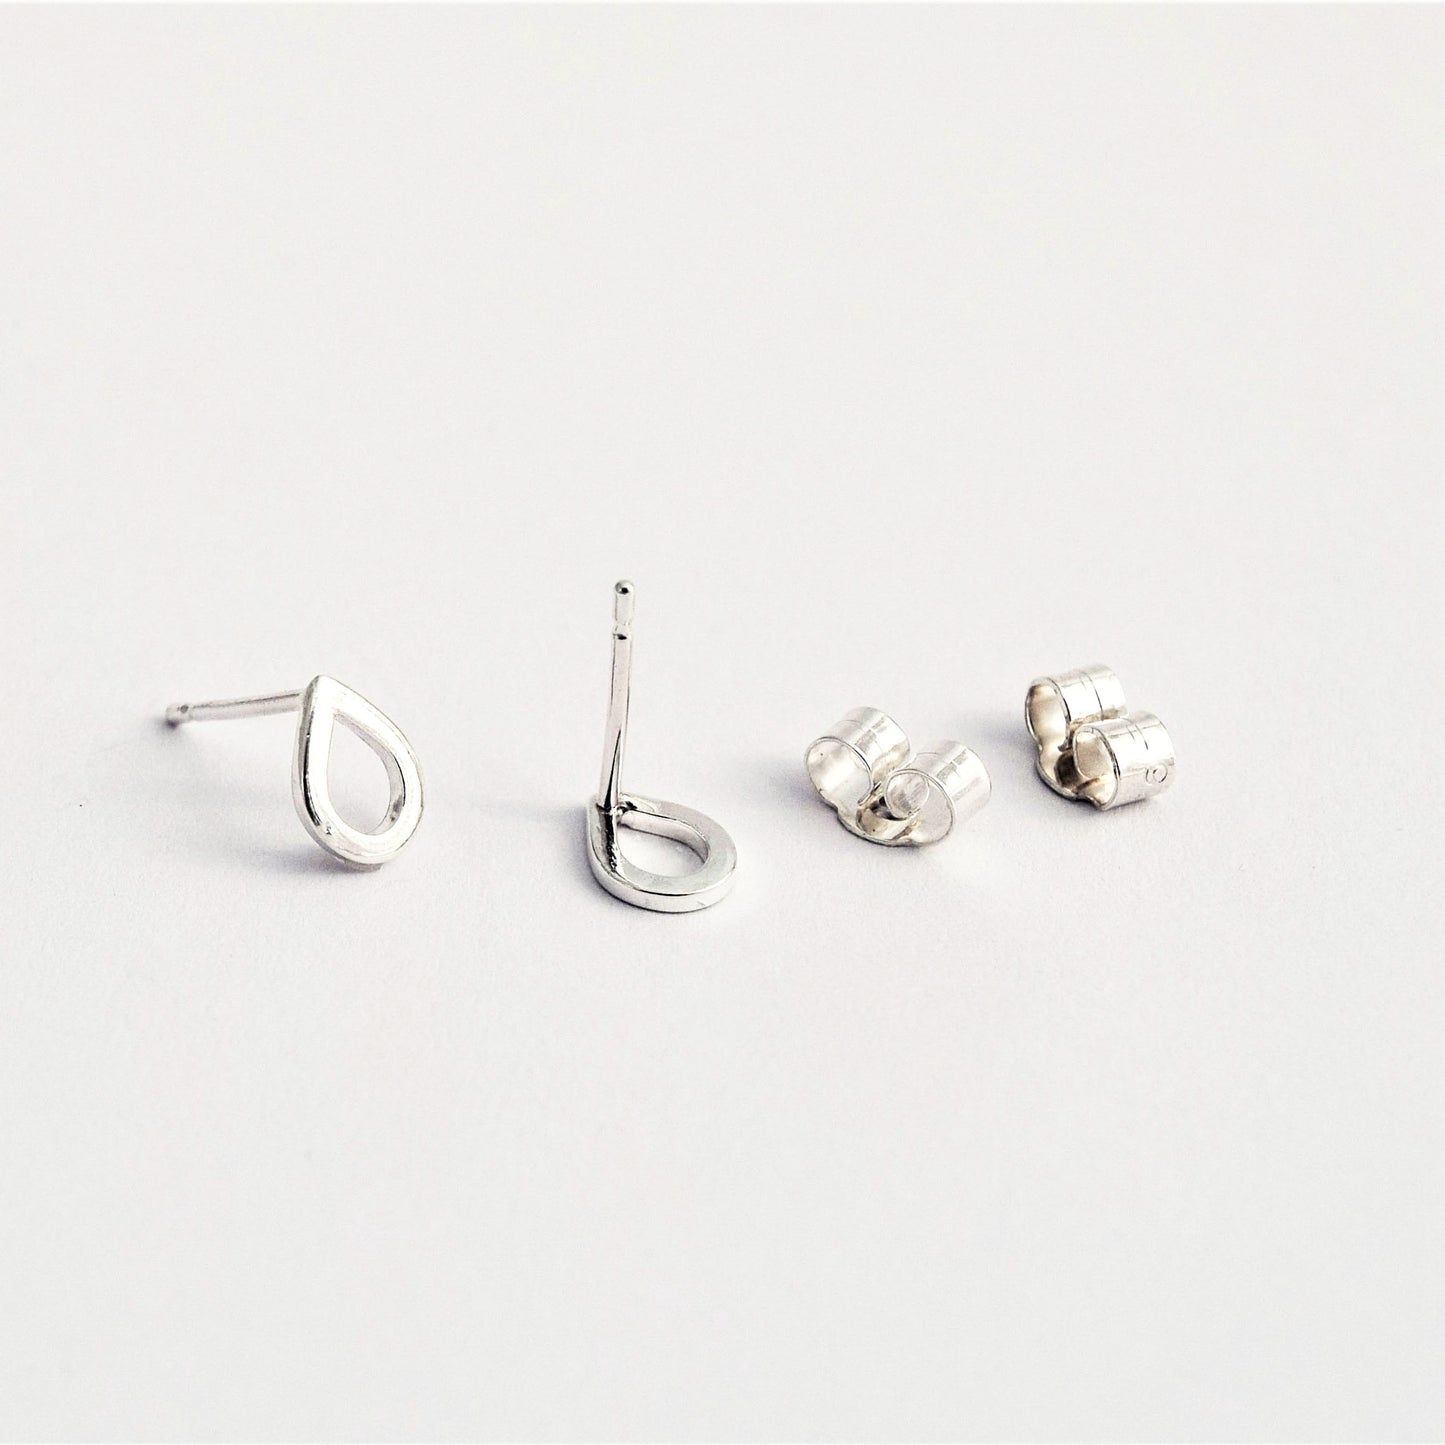 Close up product image showing teardrop studs with butterfly earring backs